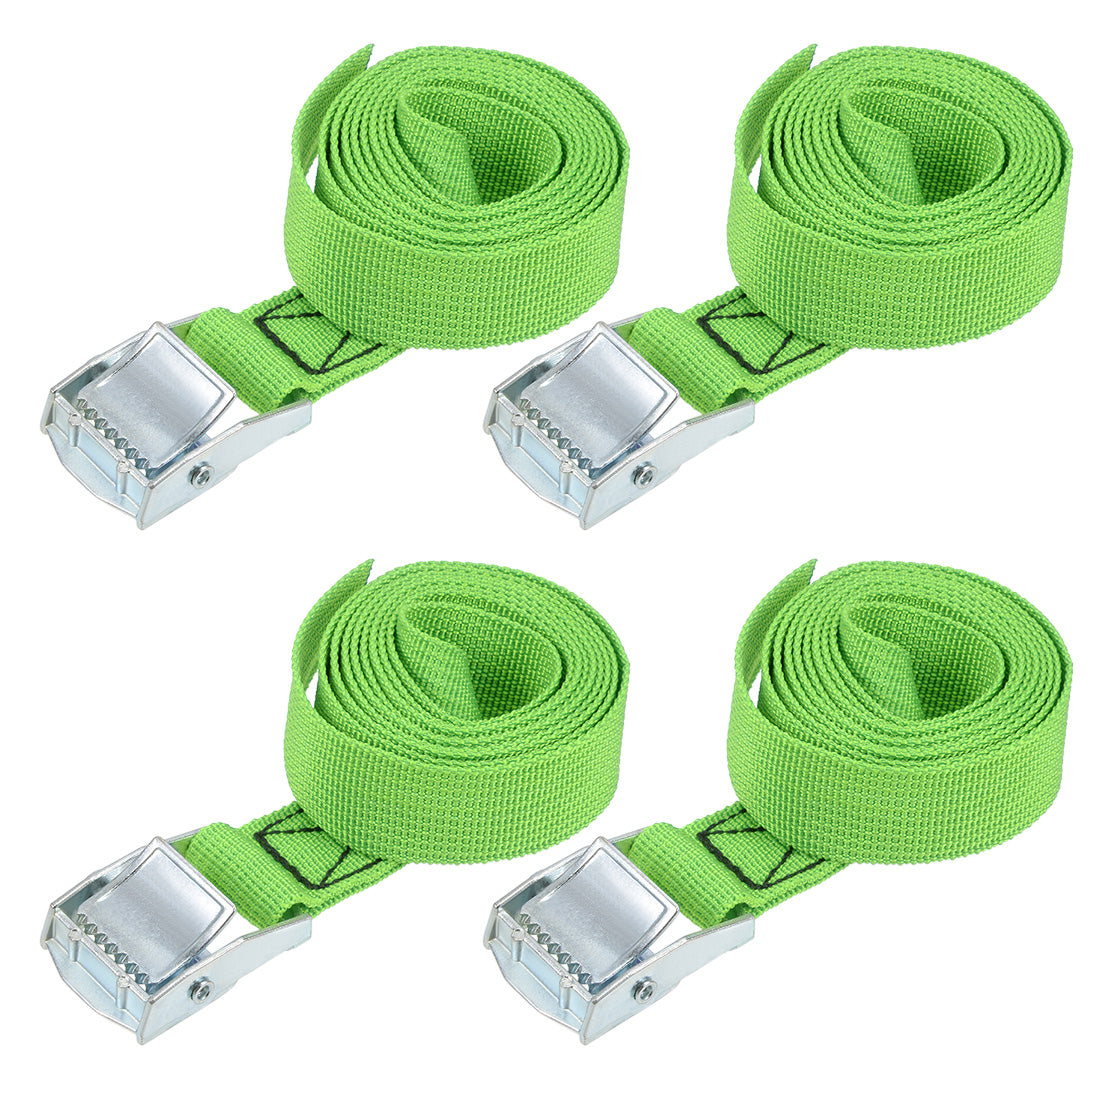 uxcell Uxcell Lashing Strap 1" x 5' Cargo Tie Down Straps with Cam Lock Buckle Up to 551lbs Green 4pcs